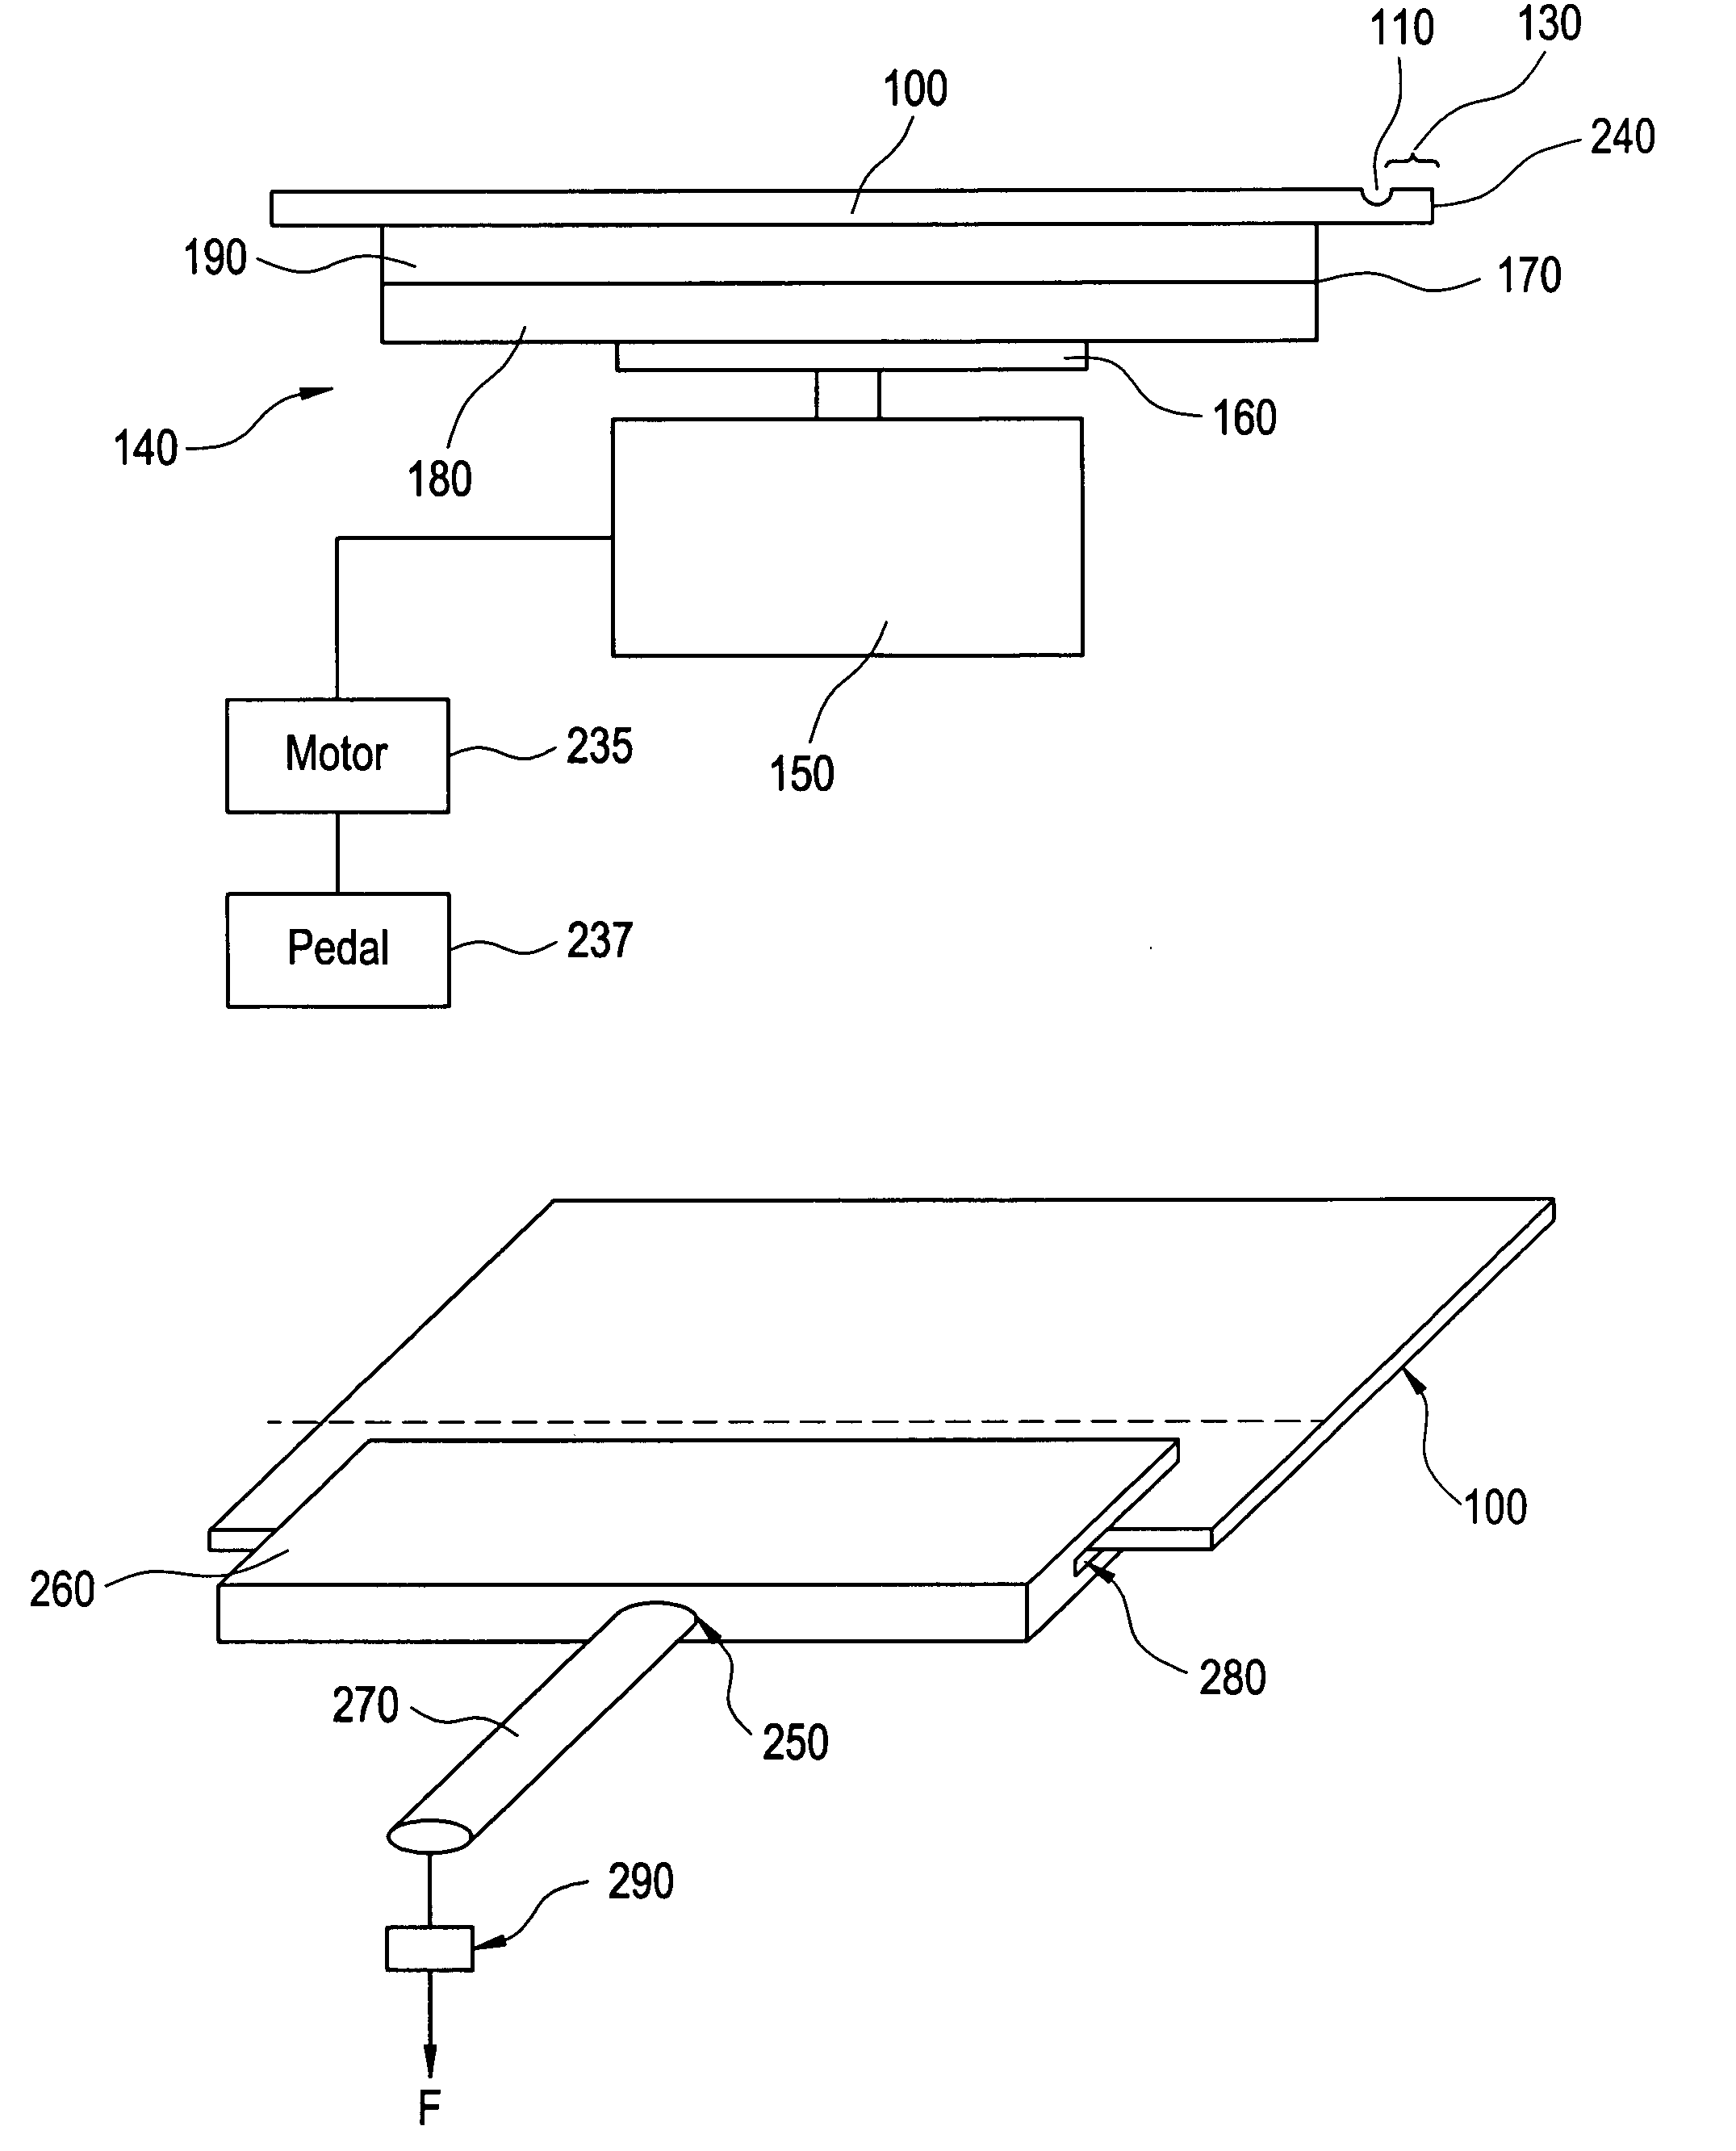 Apparatus and method for glass separation for flat panel displays